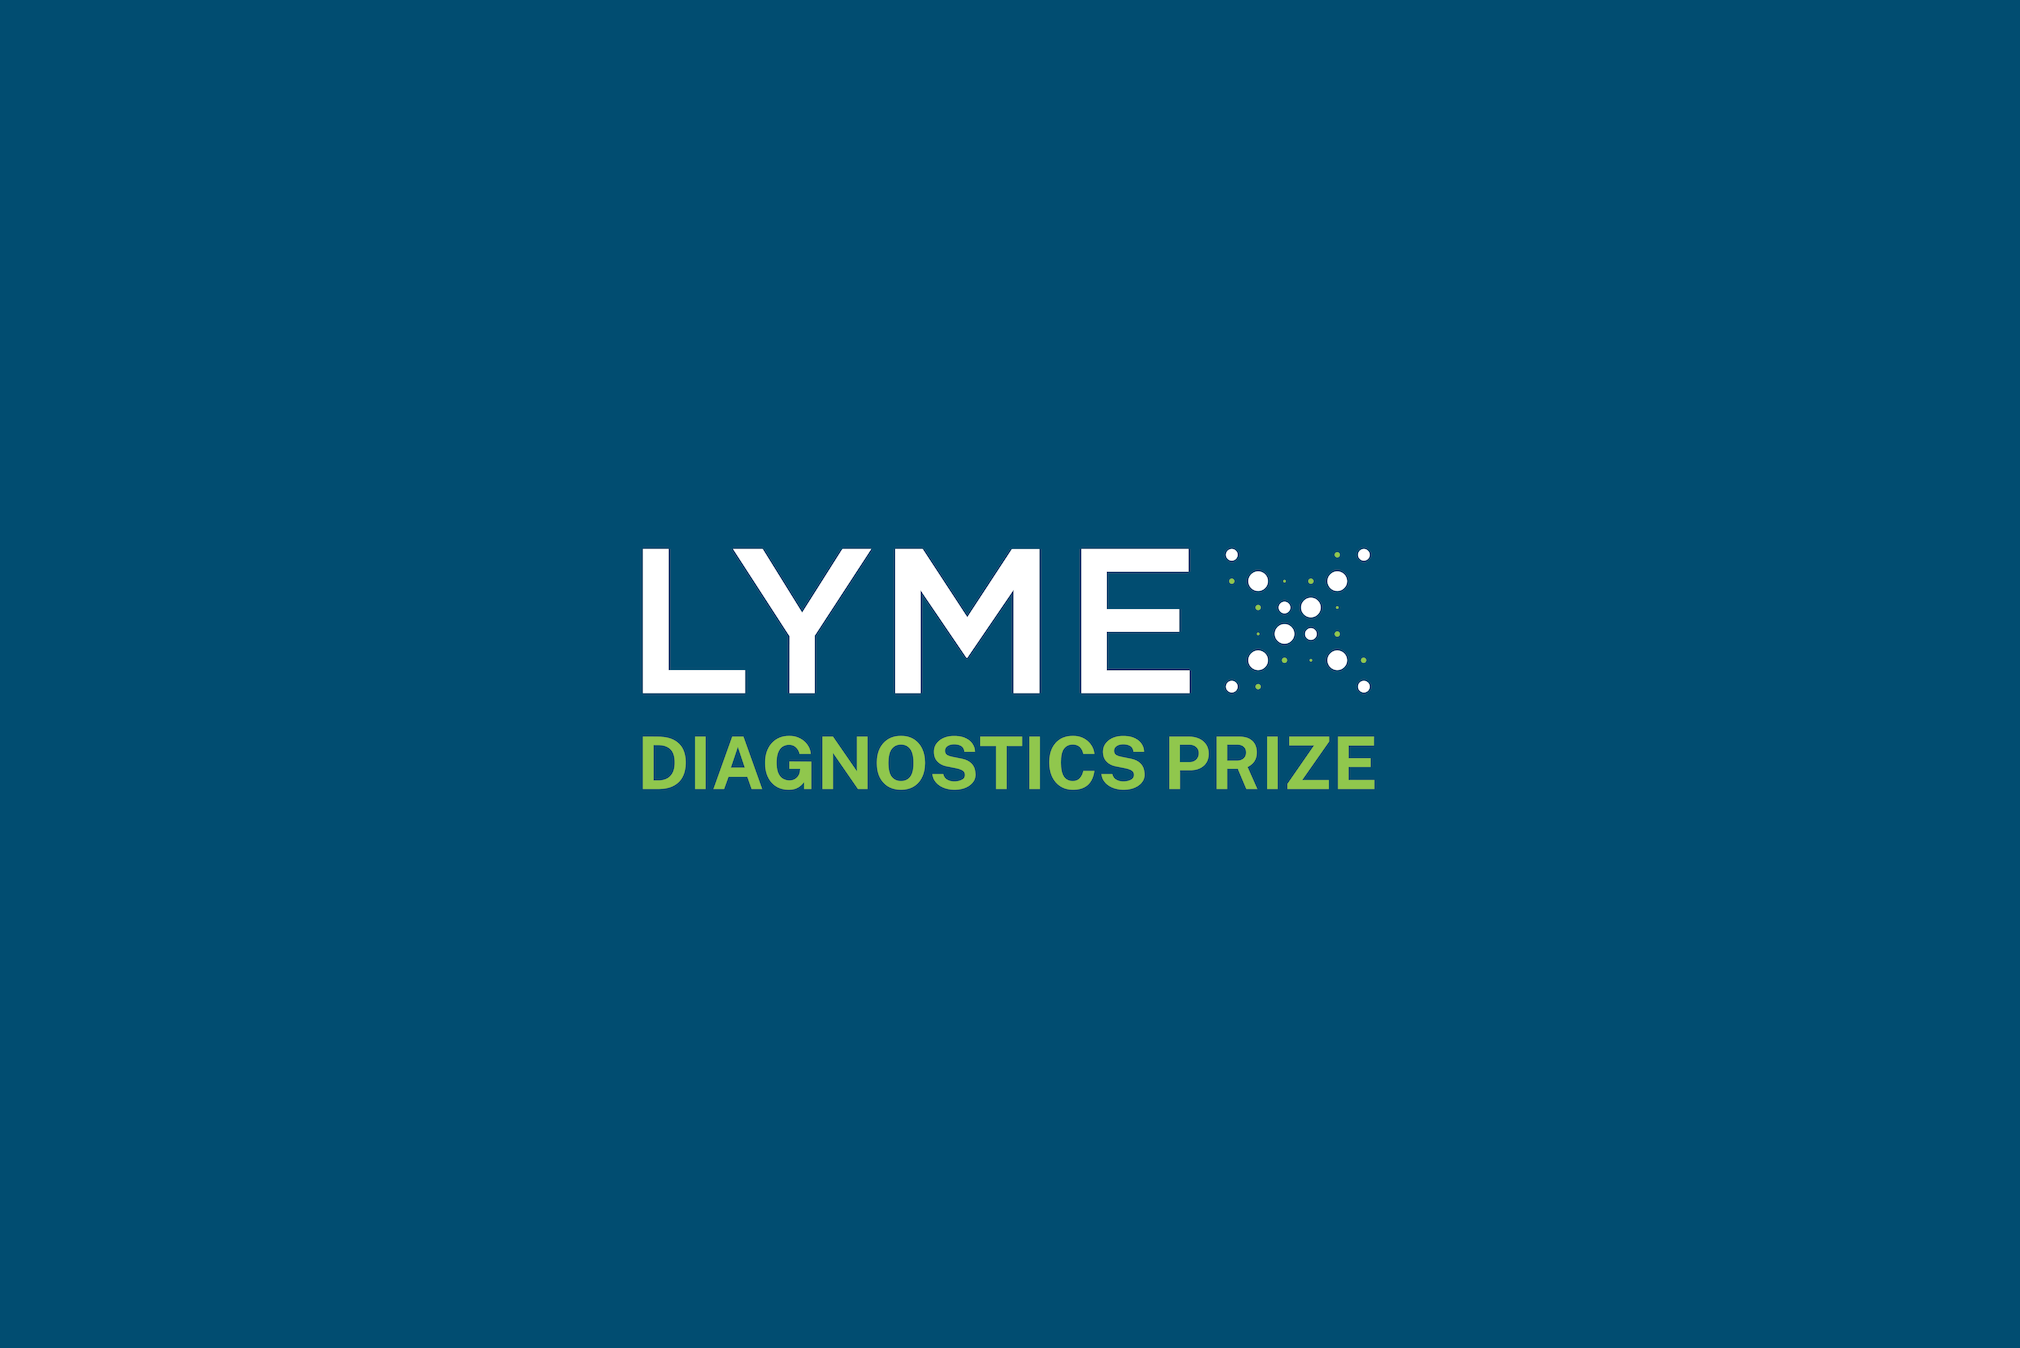 LymeX Diagnostics Prize to launch this spring